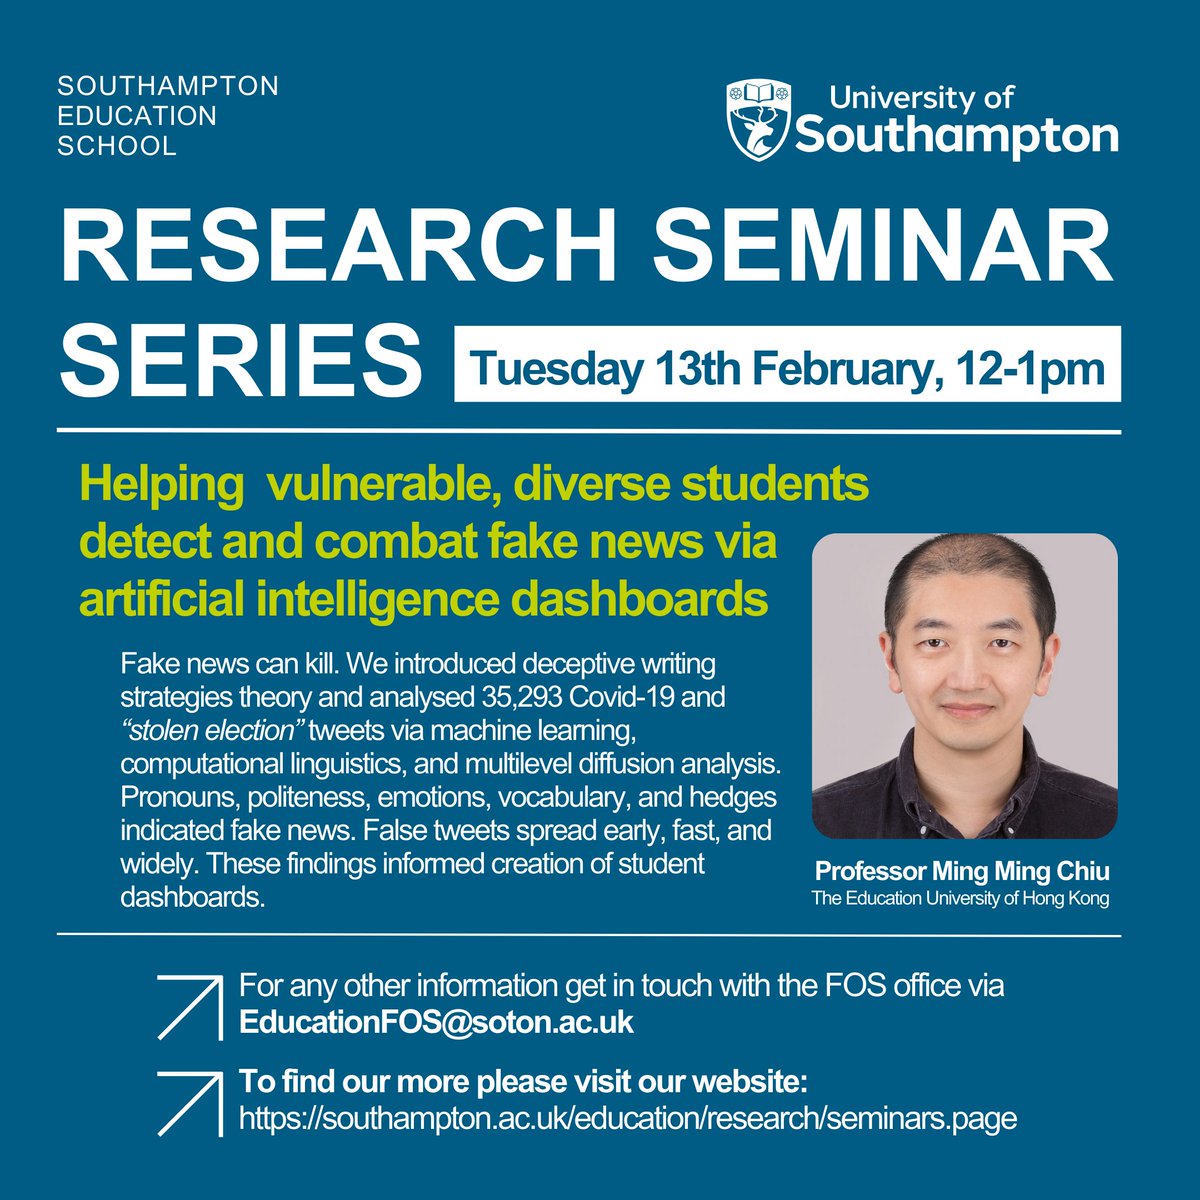 Details of our next seminar are below, to find out more and sign up for seminars please visit southampton.ac.uk/education/rese… @unisouthampton @CRI_UoS #ai #diversity